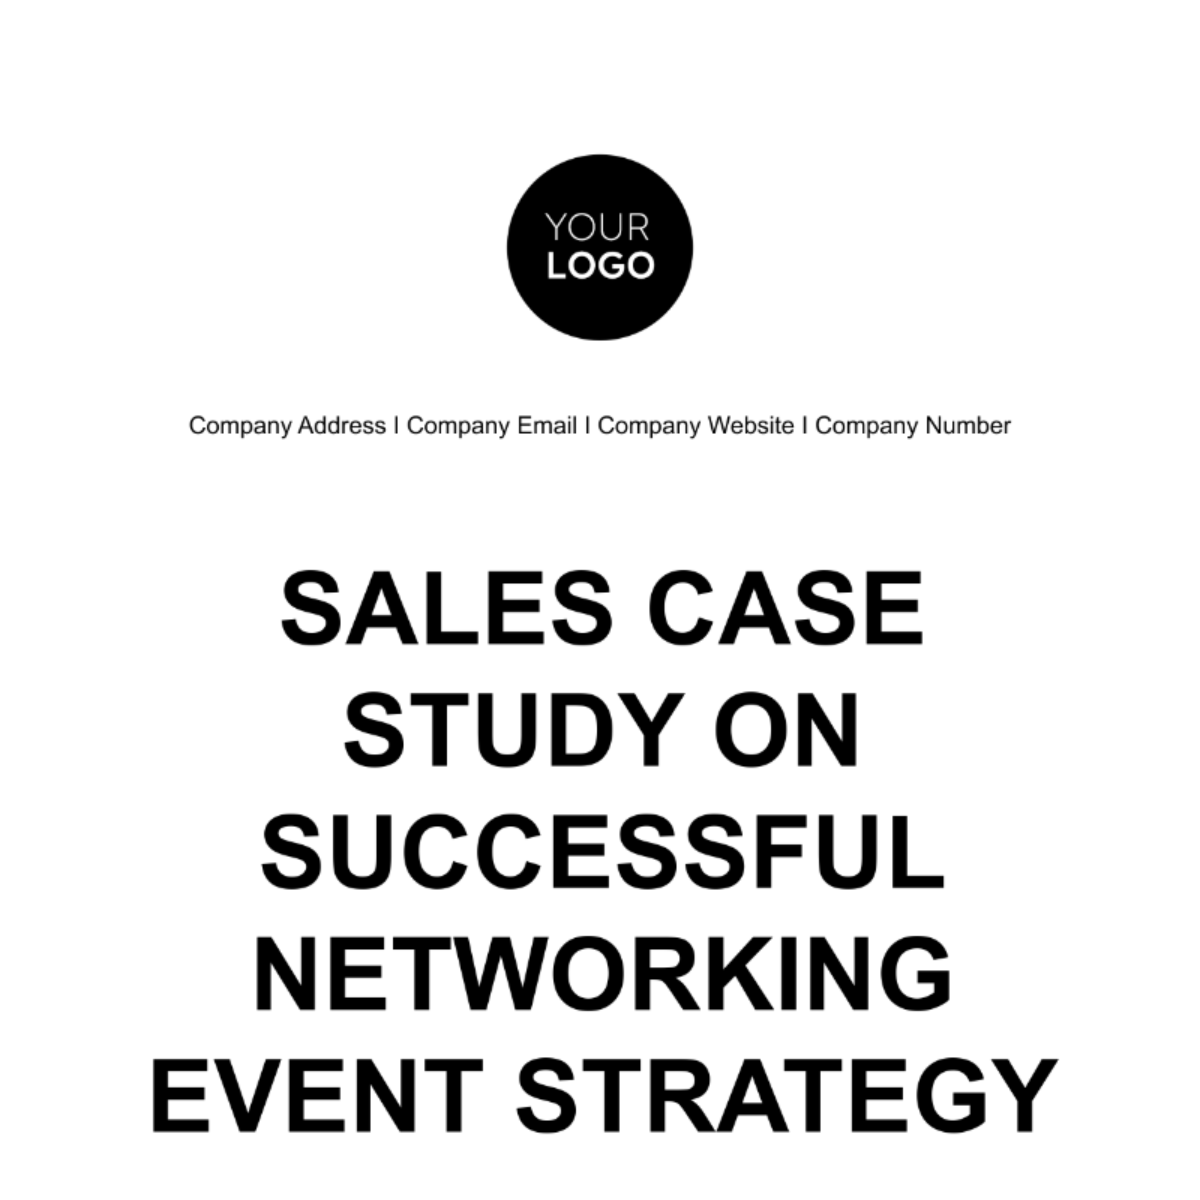 Free Sales Case Study on Successful Networking Event Strategy Template